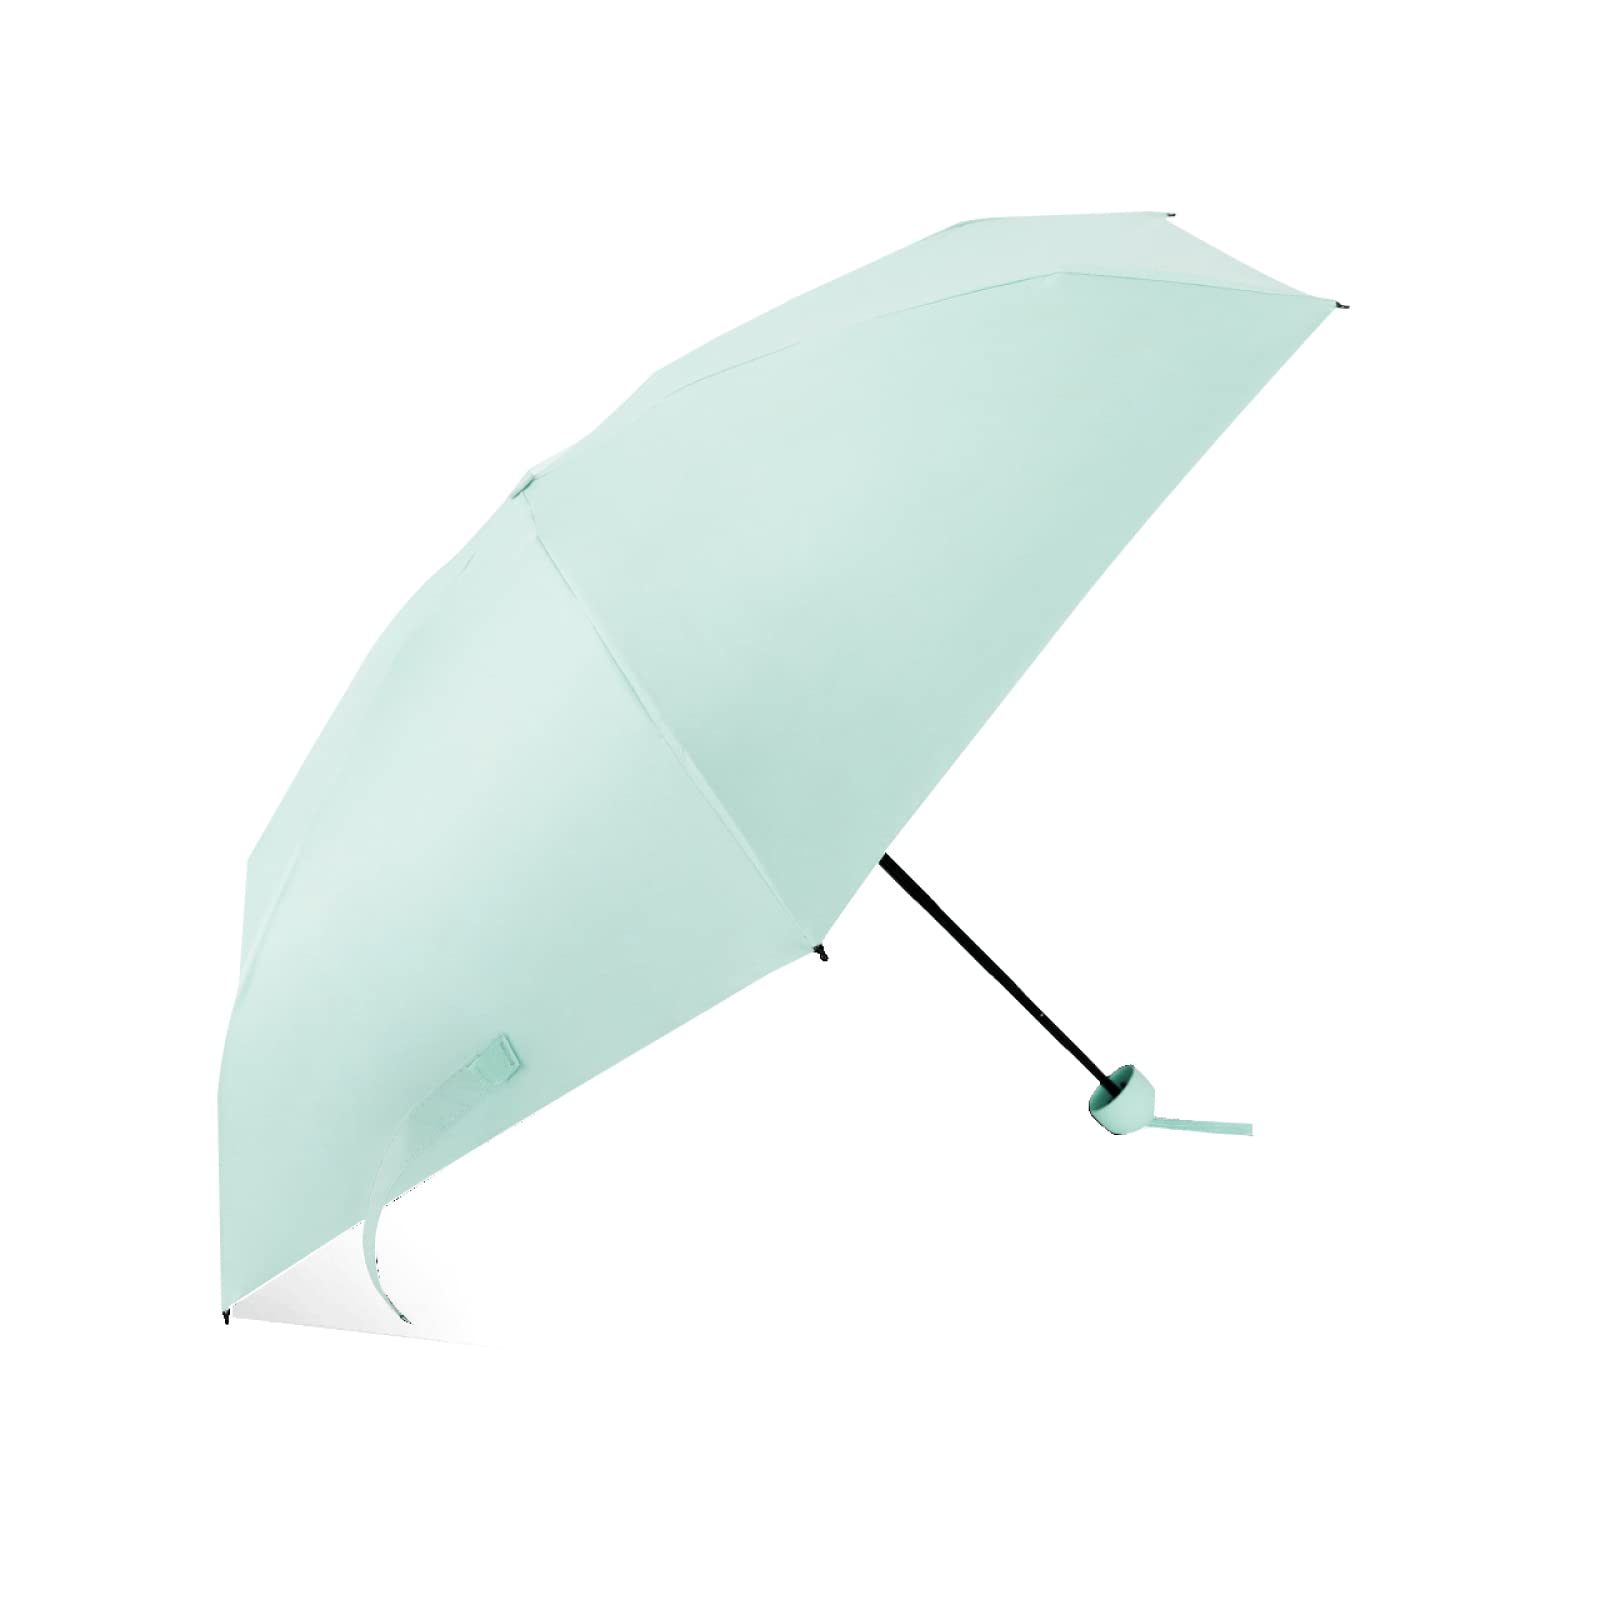 ABSORBIA Unisex 5 fold Umbrella with capsule cover for Rain & Sun Protection| Double Layer Folding Portable Umbrella With Cover| Green colour | Fancy and Easy to Travel | Open Diameter 97CM…